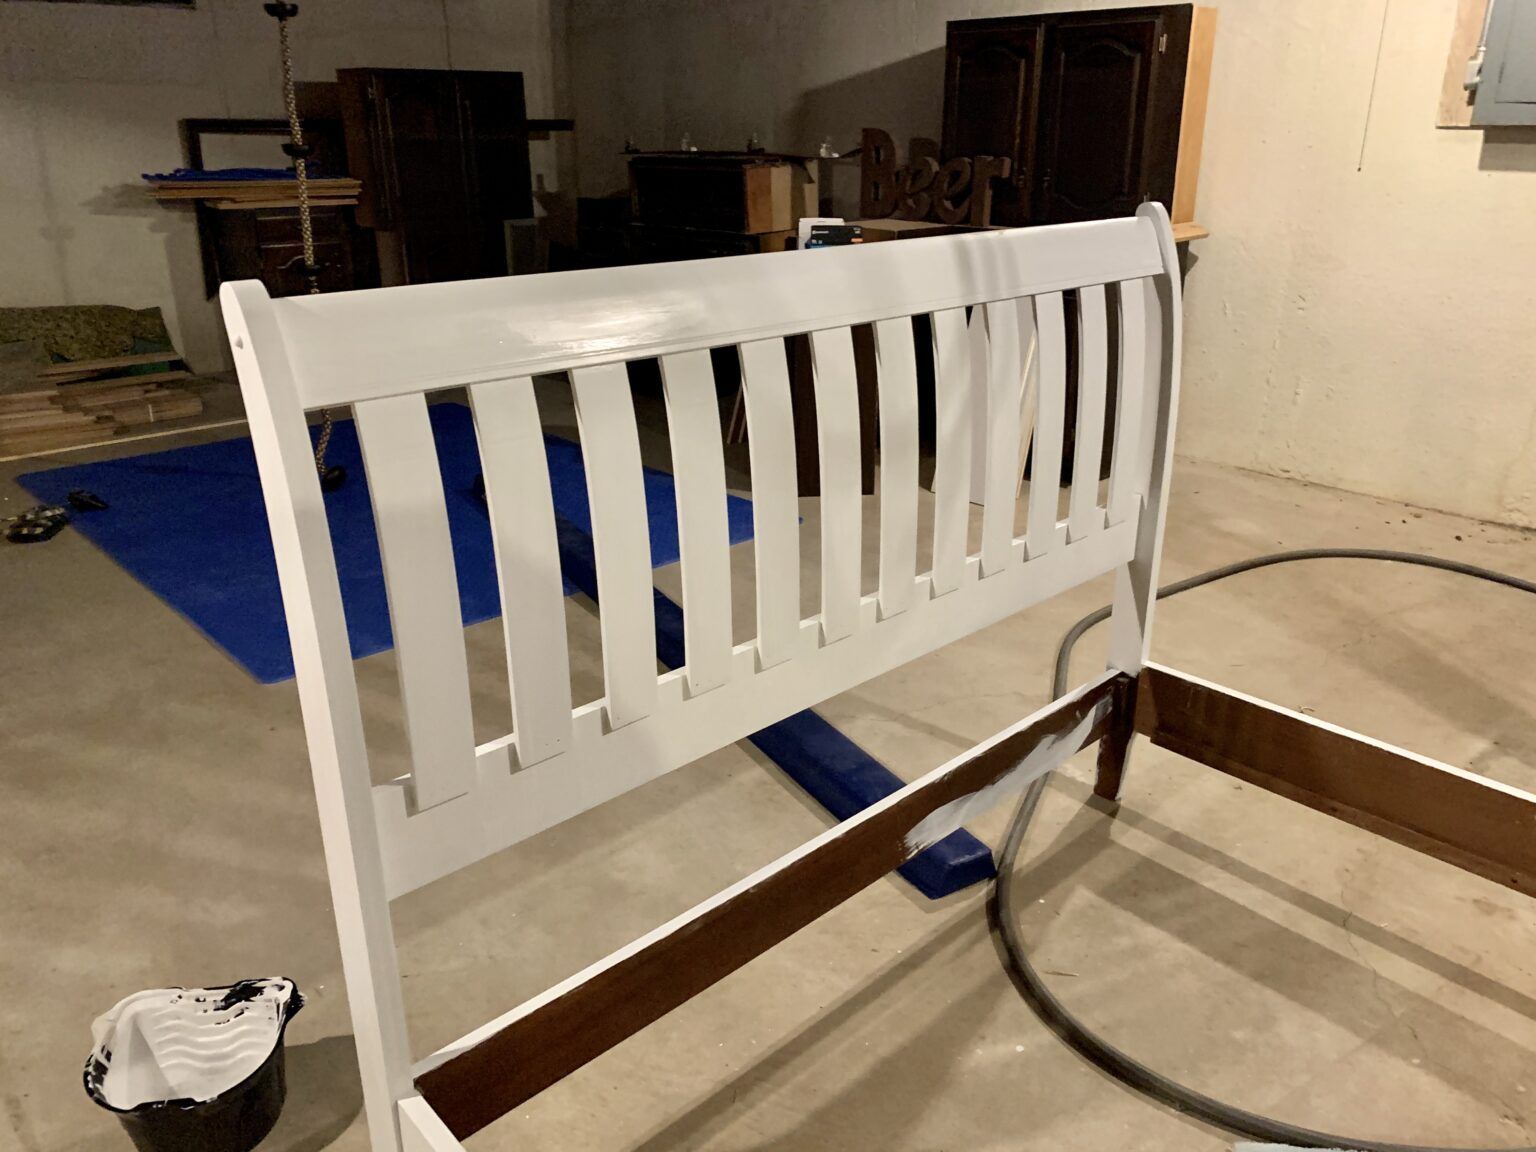 How to Paint A Bed Frame | DIY - Building Bluebird -   18 diy Bed Frame painting ideas